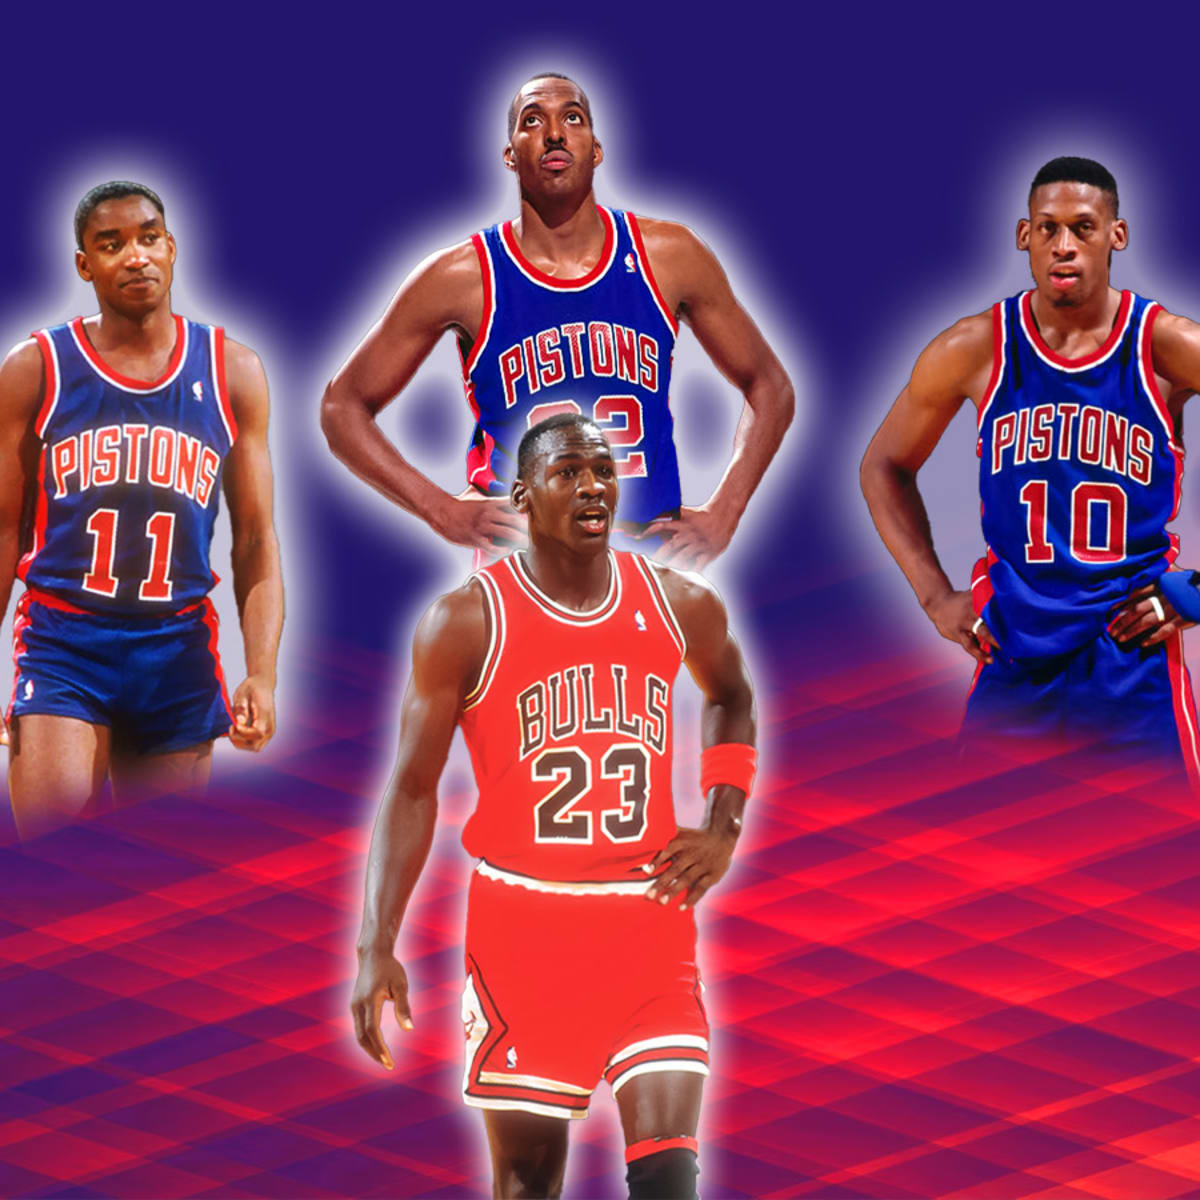 Michael Jordan earned $7 million 32 years ago but had to put on 15 pounds  of muscle to bear Isiah Thomas and Pistons' physicality - The SportsRush